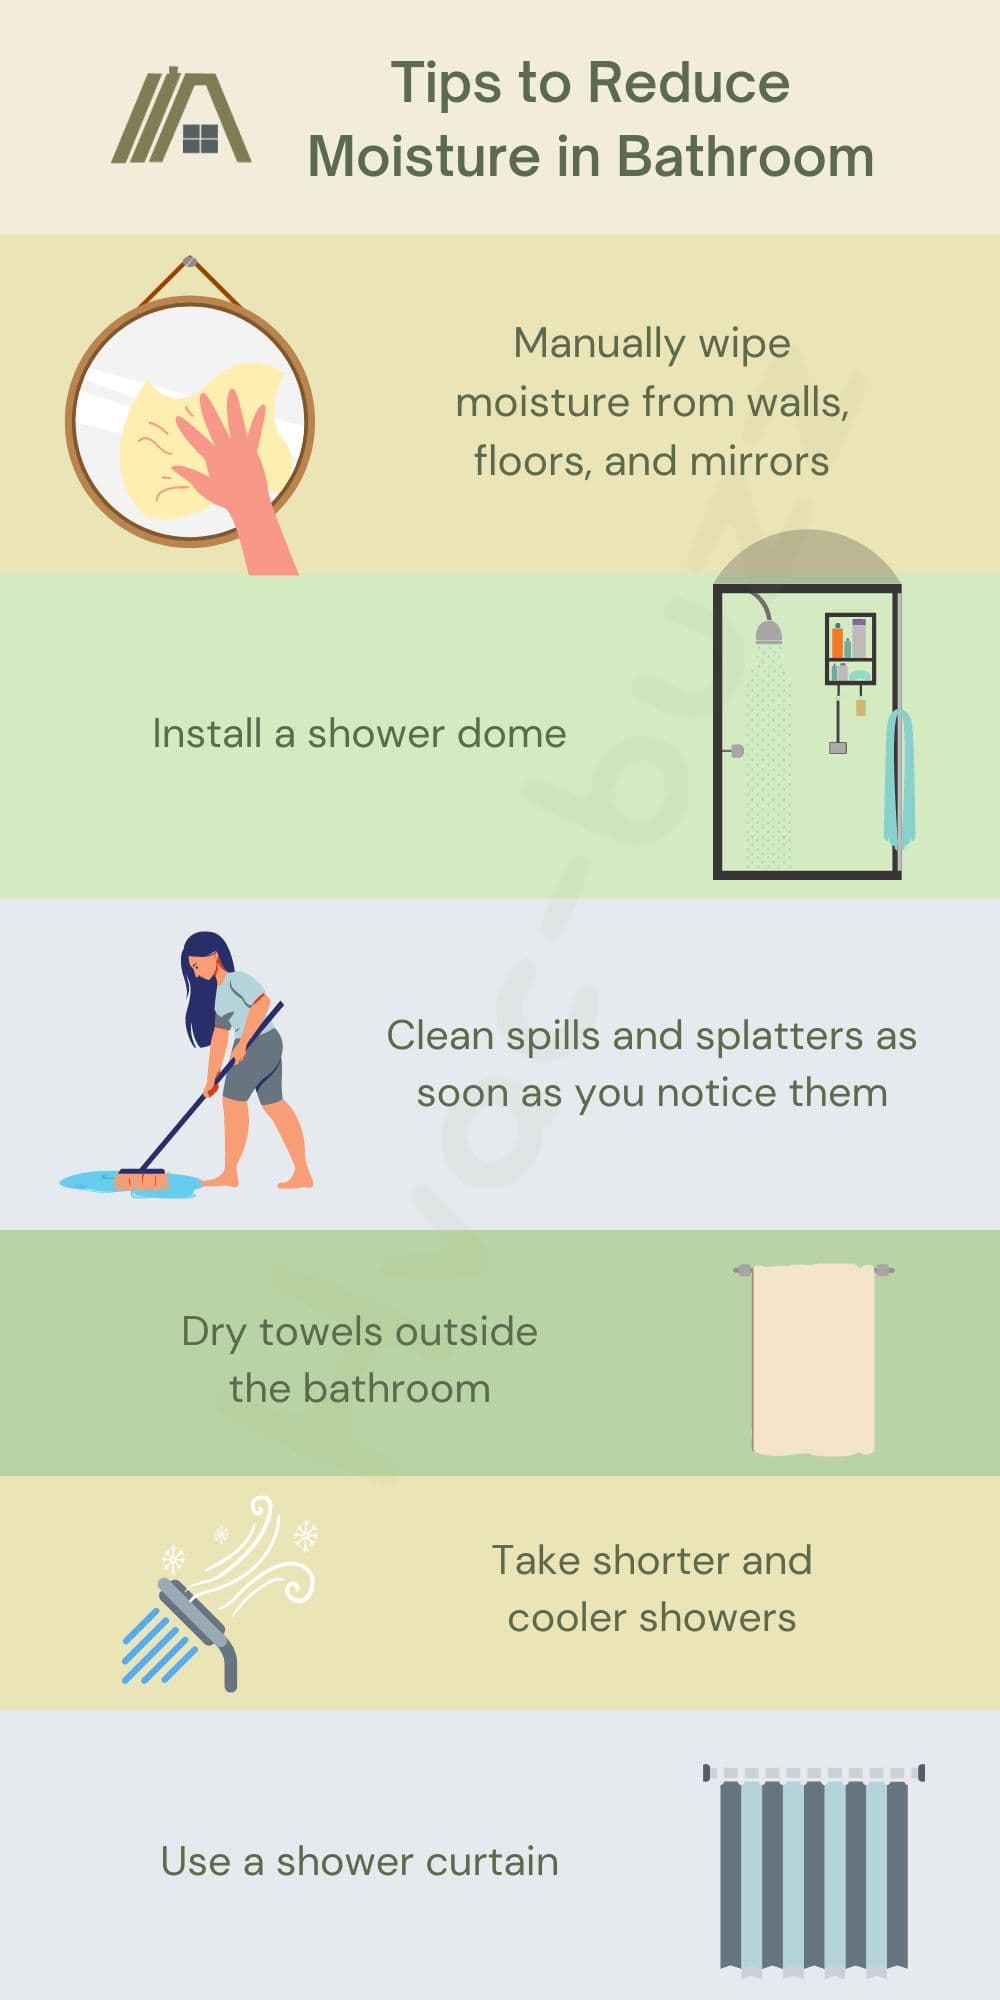 Tips to Reduce Moisture in Bathroom